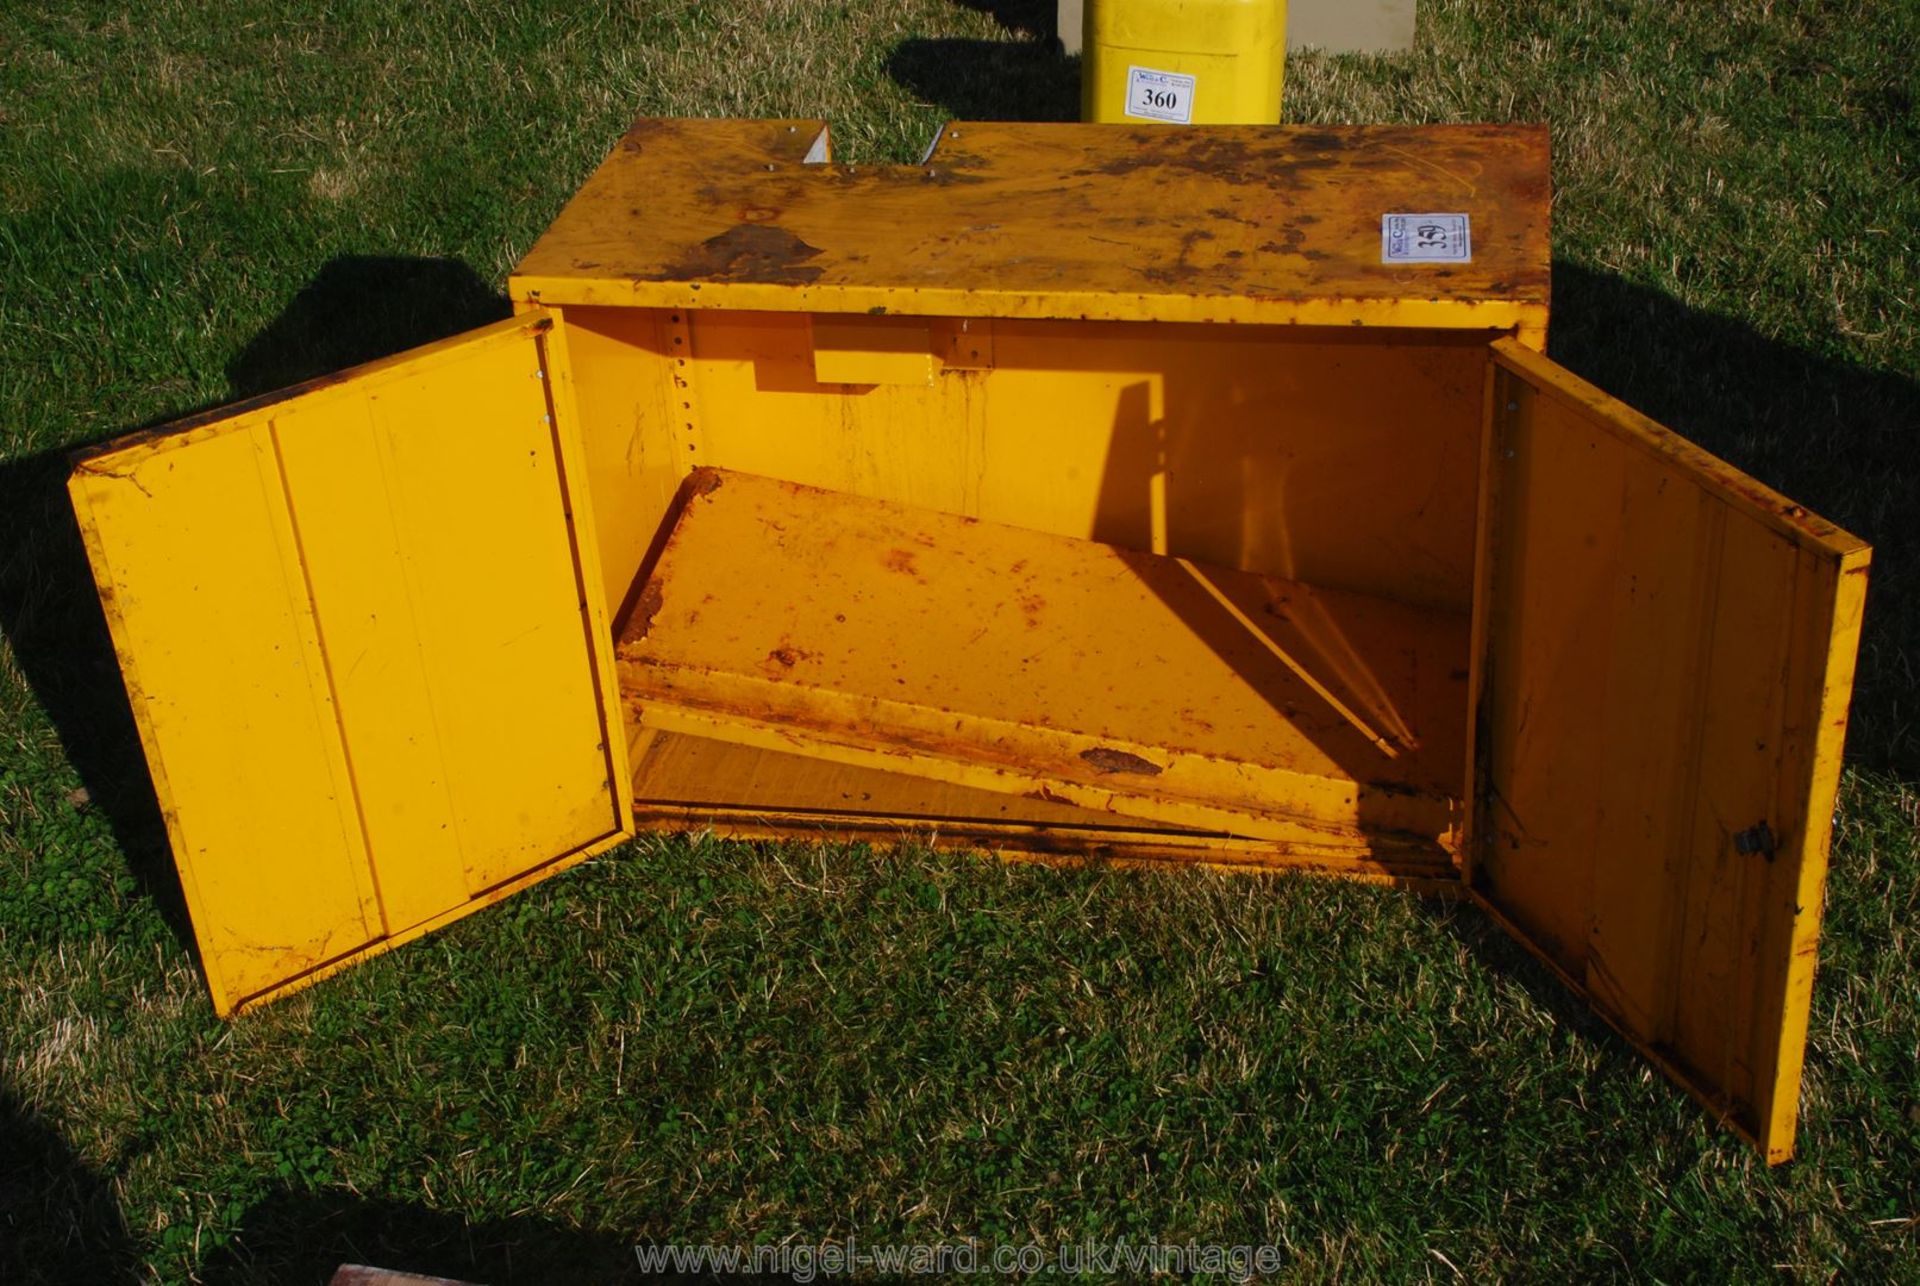 A yellow workshop cabinet.